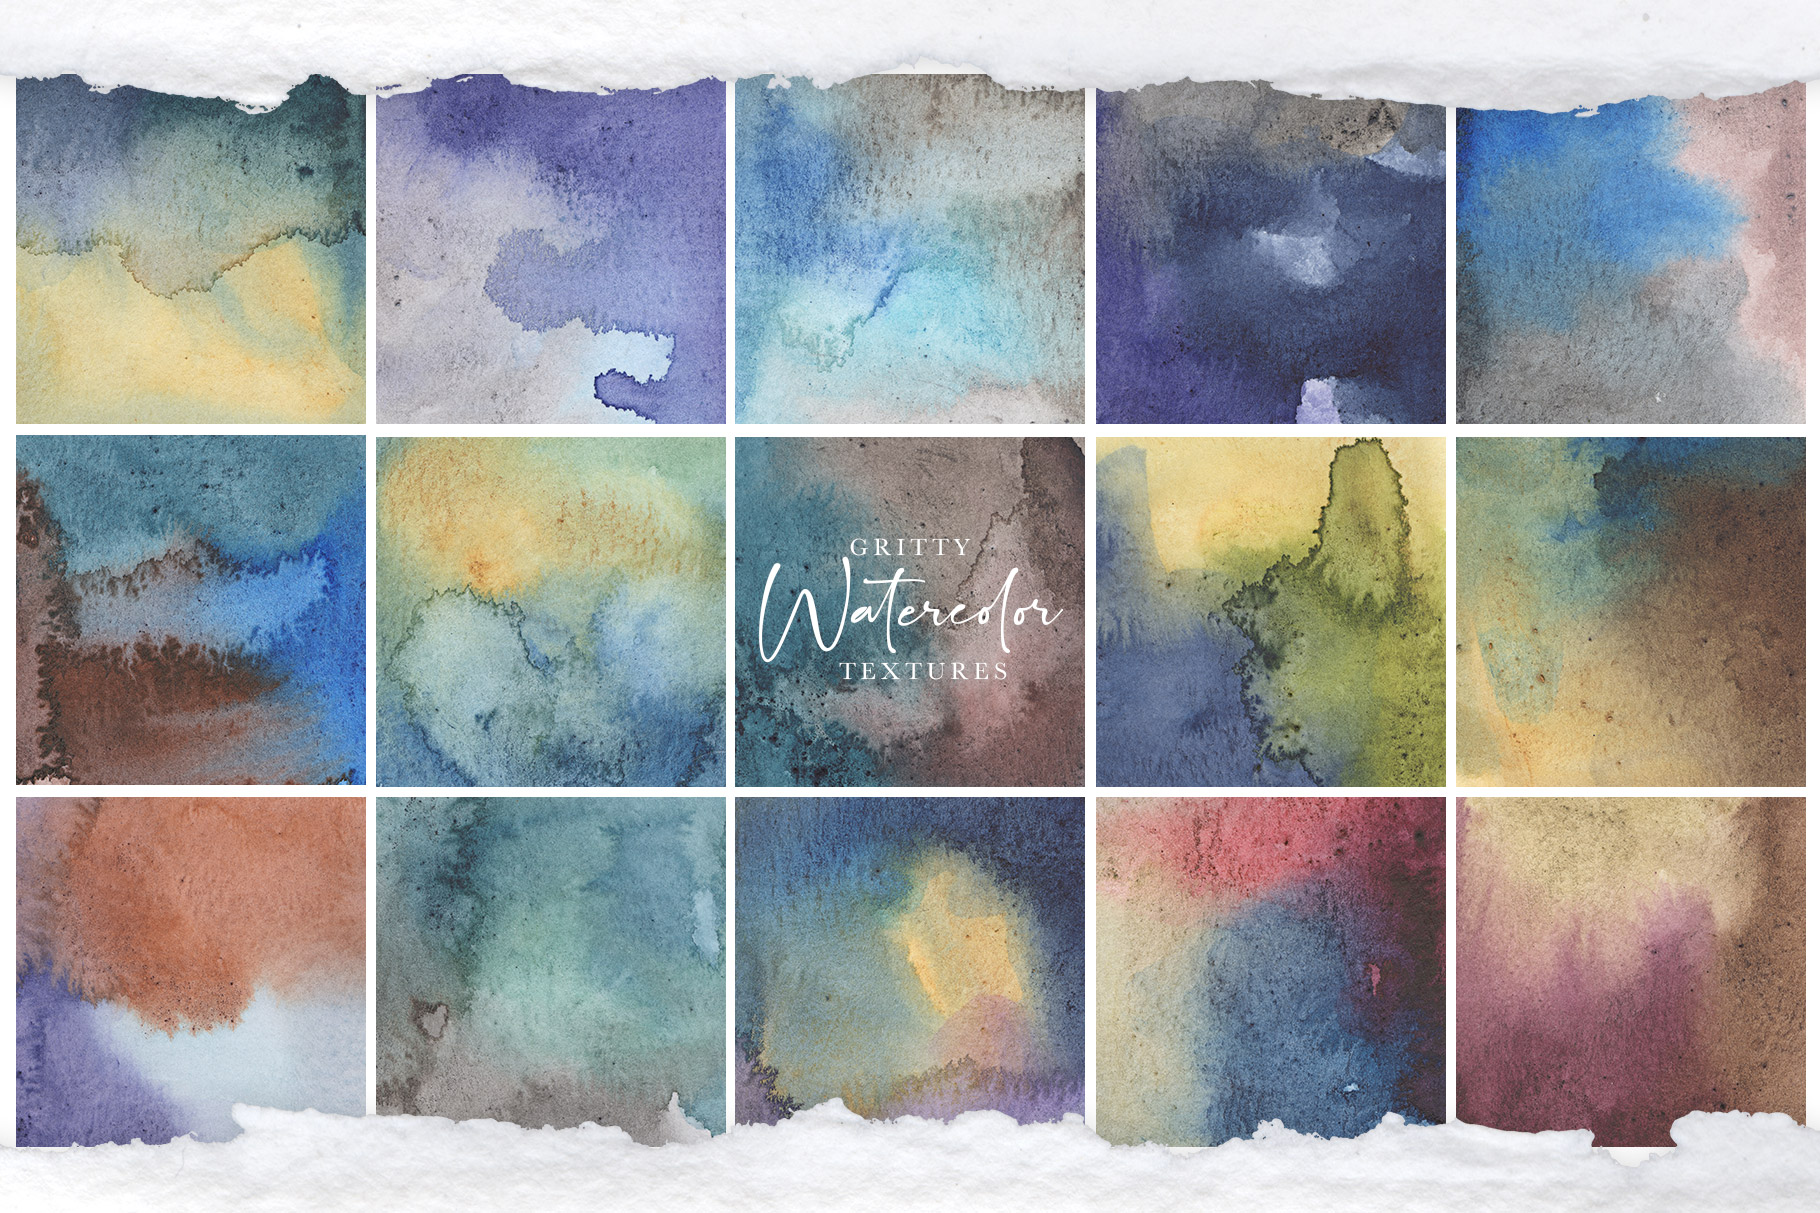 Gritty Watercolor Textures Vol.2 - Nightflower